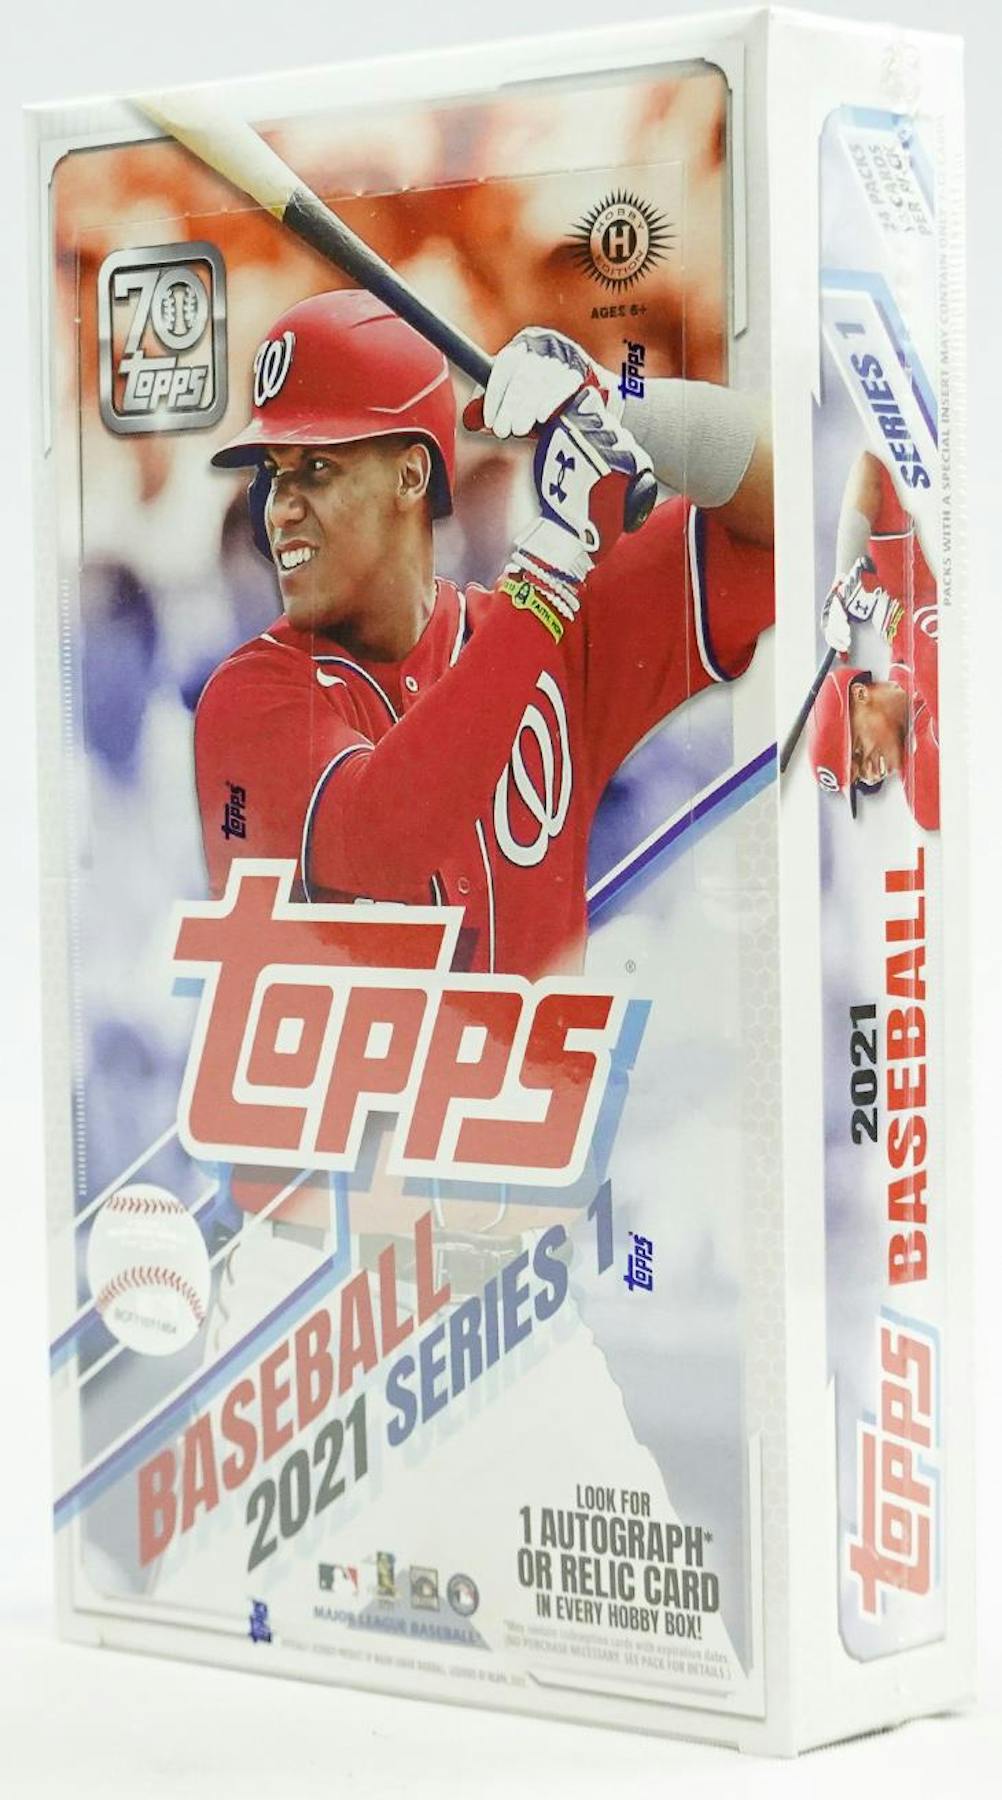 Chicago Cubs / 2022 Topps Baseball Team Set (Series 1 and 2) with (17)  Cards. PLUS 2021 Topps Cubs Baseball Team Set (Series 1 and 2) with (22)  Cards.